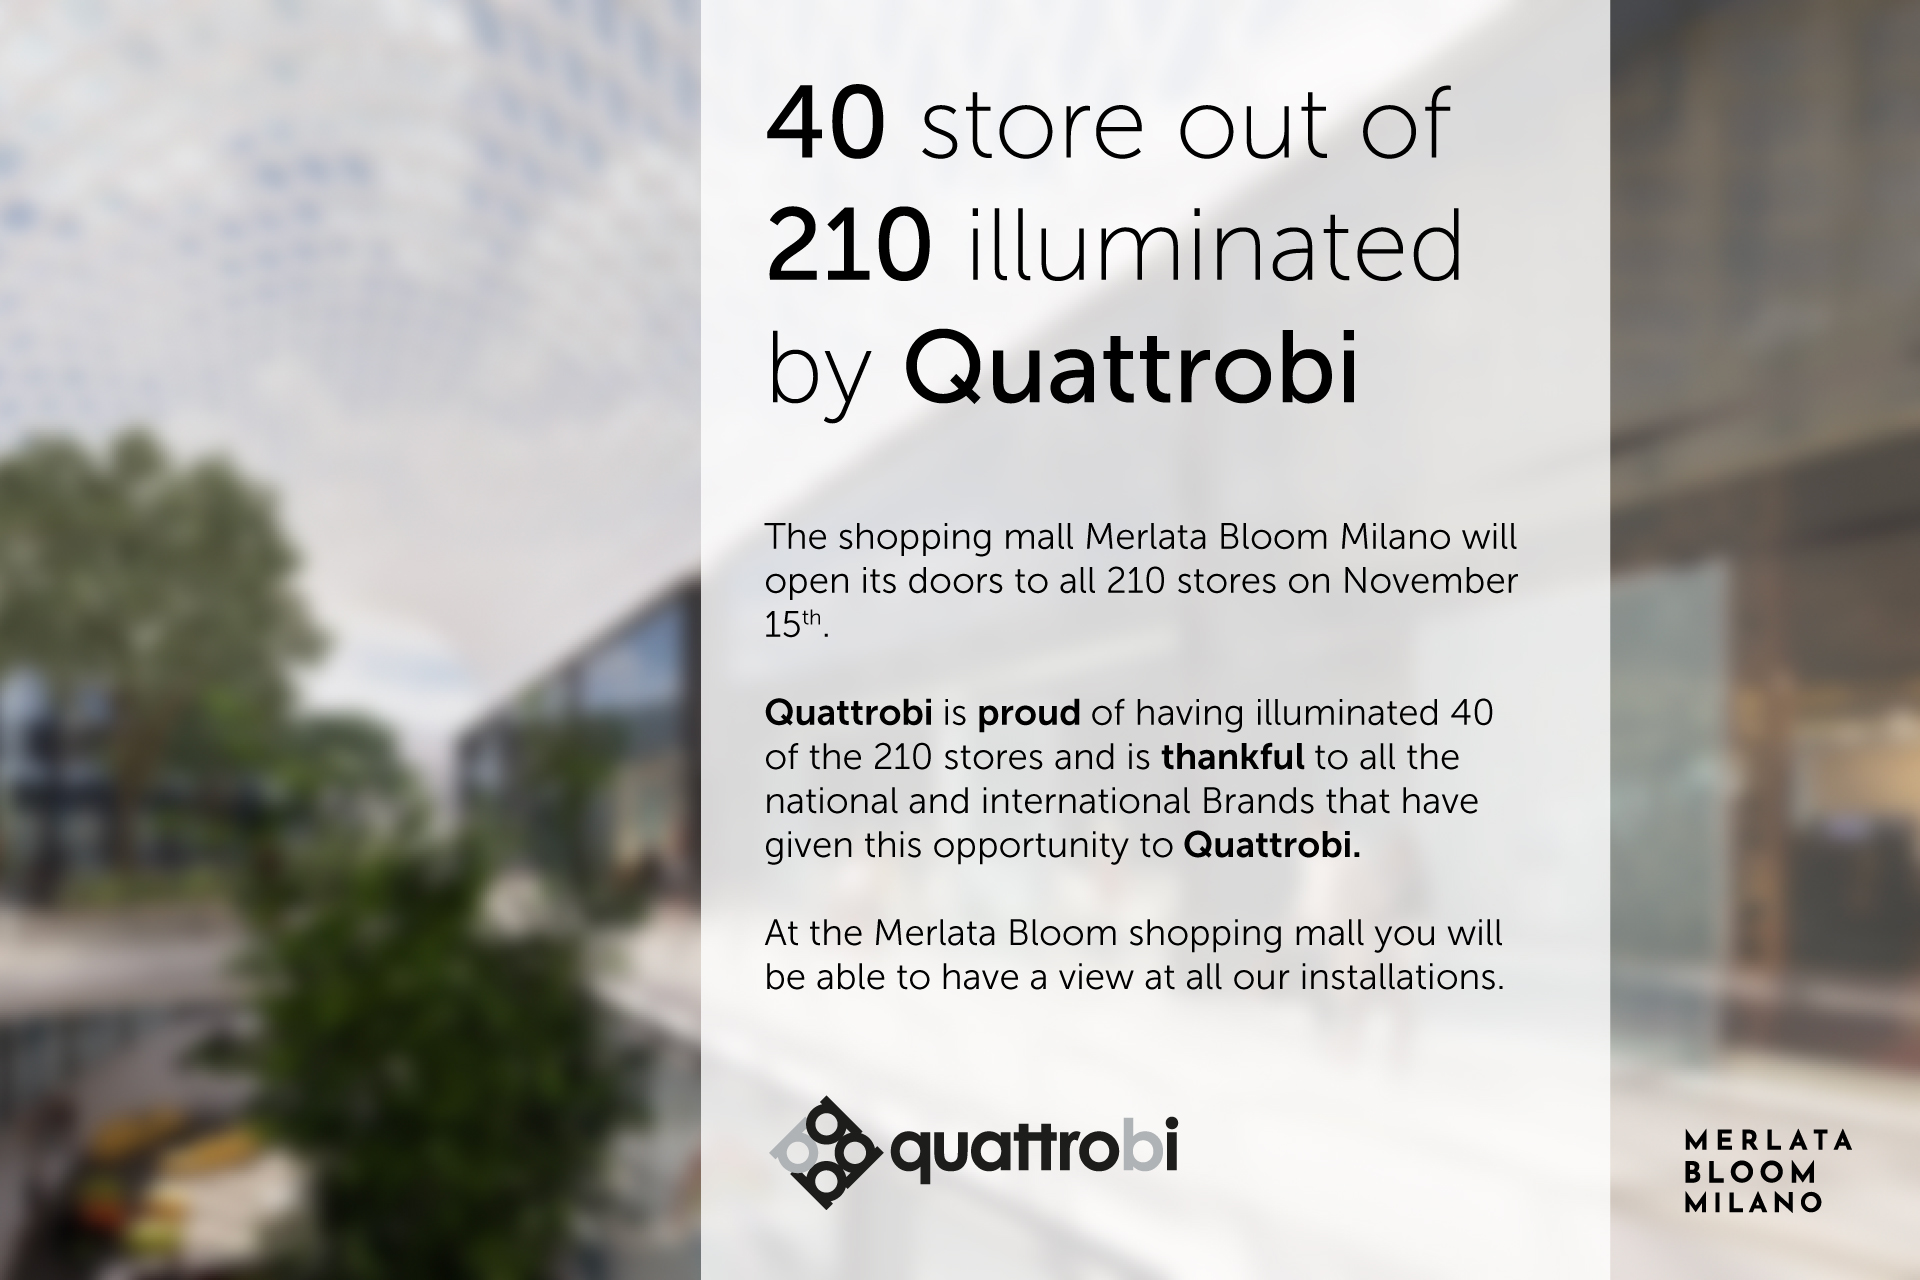 40 store out of 210 illuminated by Quattrobi image